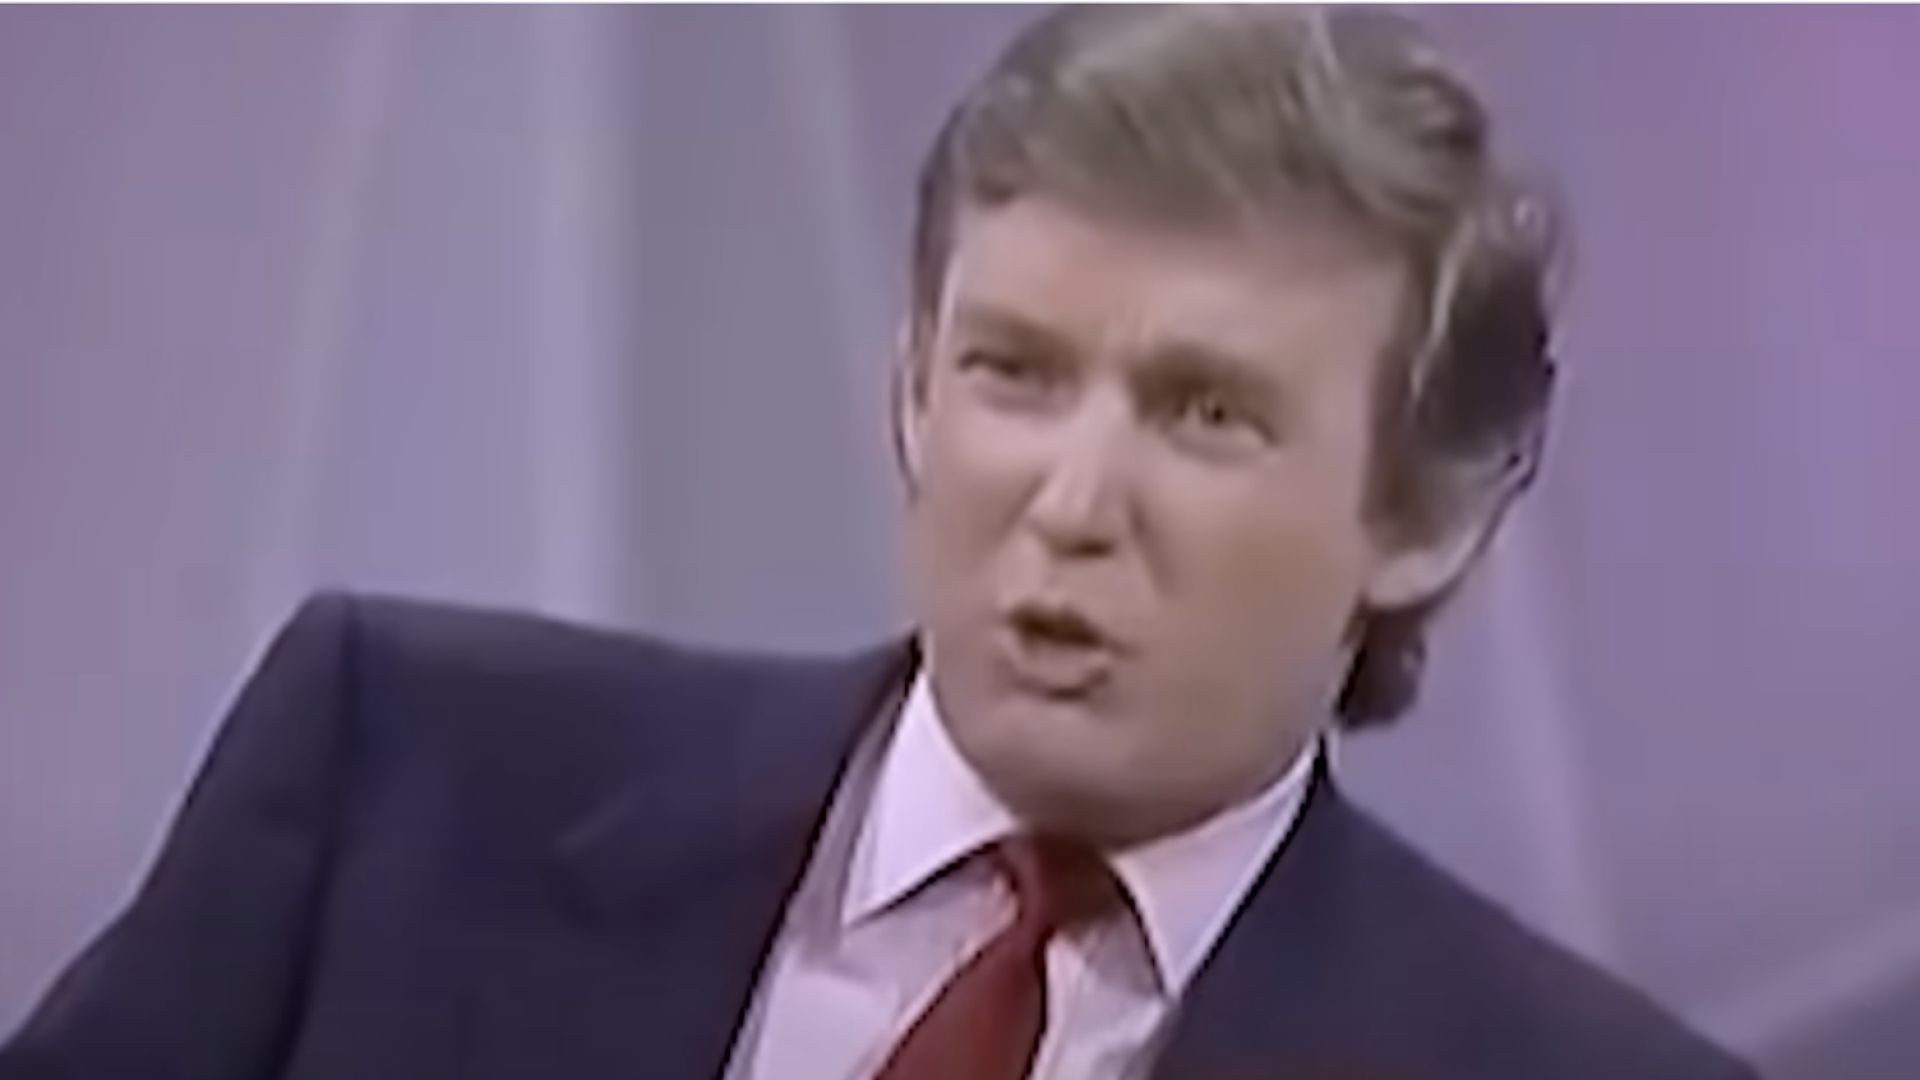 What Trump Said In 1988 Will Leave You SPEECHLESS Compared To Biden